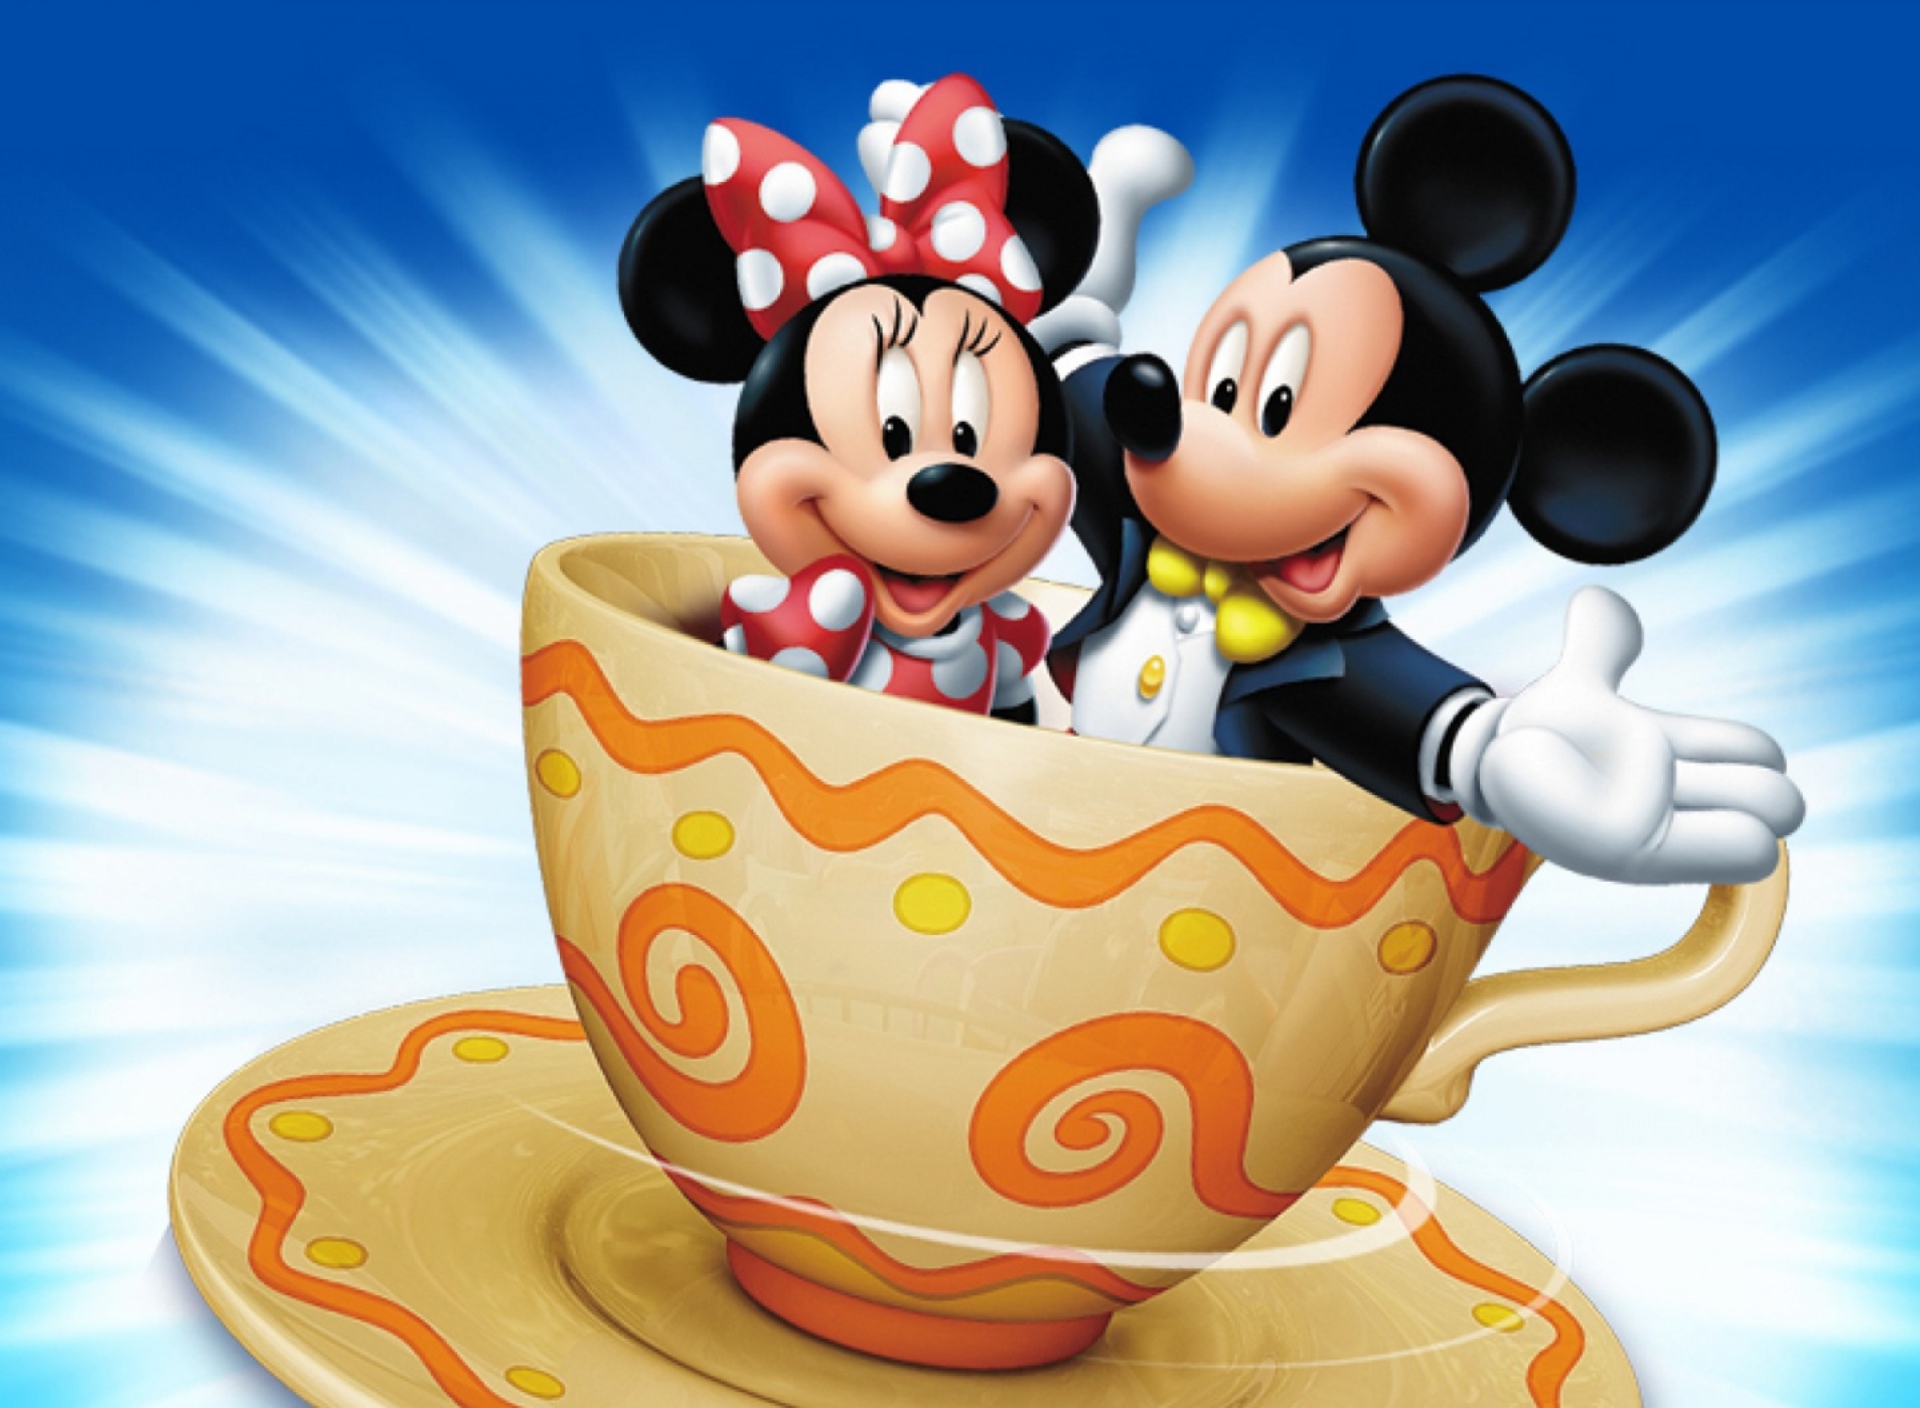 Mickey And Minnie Mouse In Cup screenshot #1 1920x1408